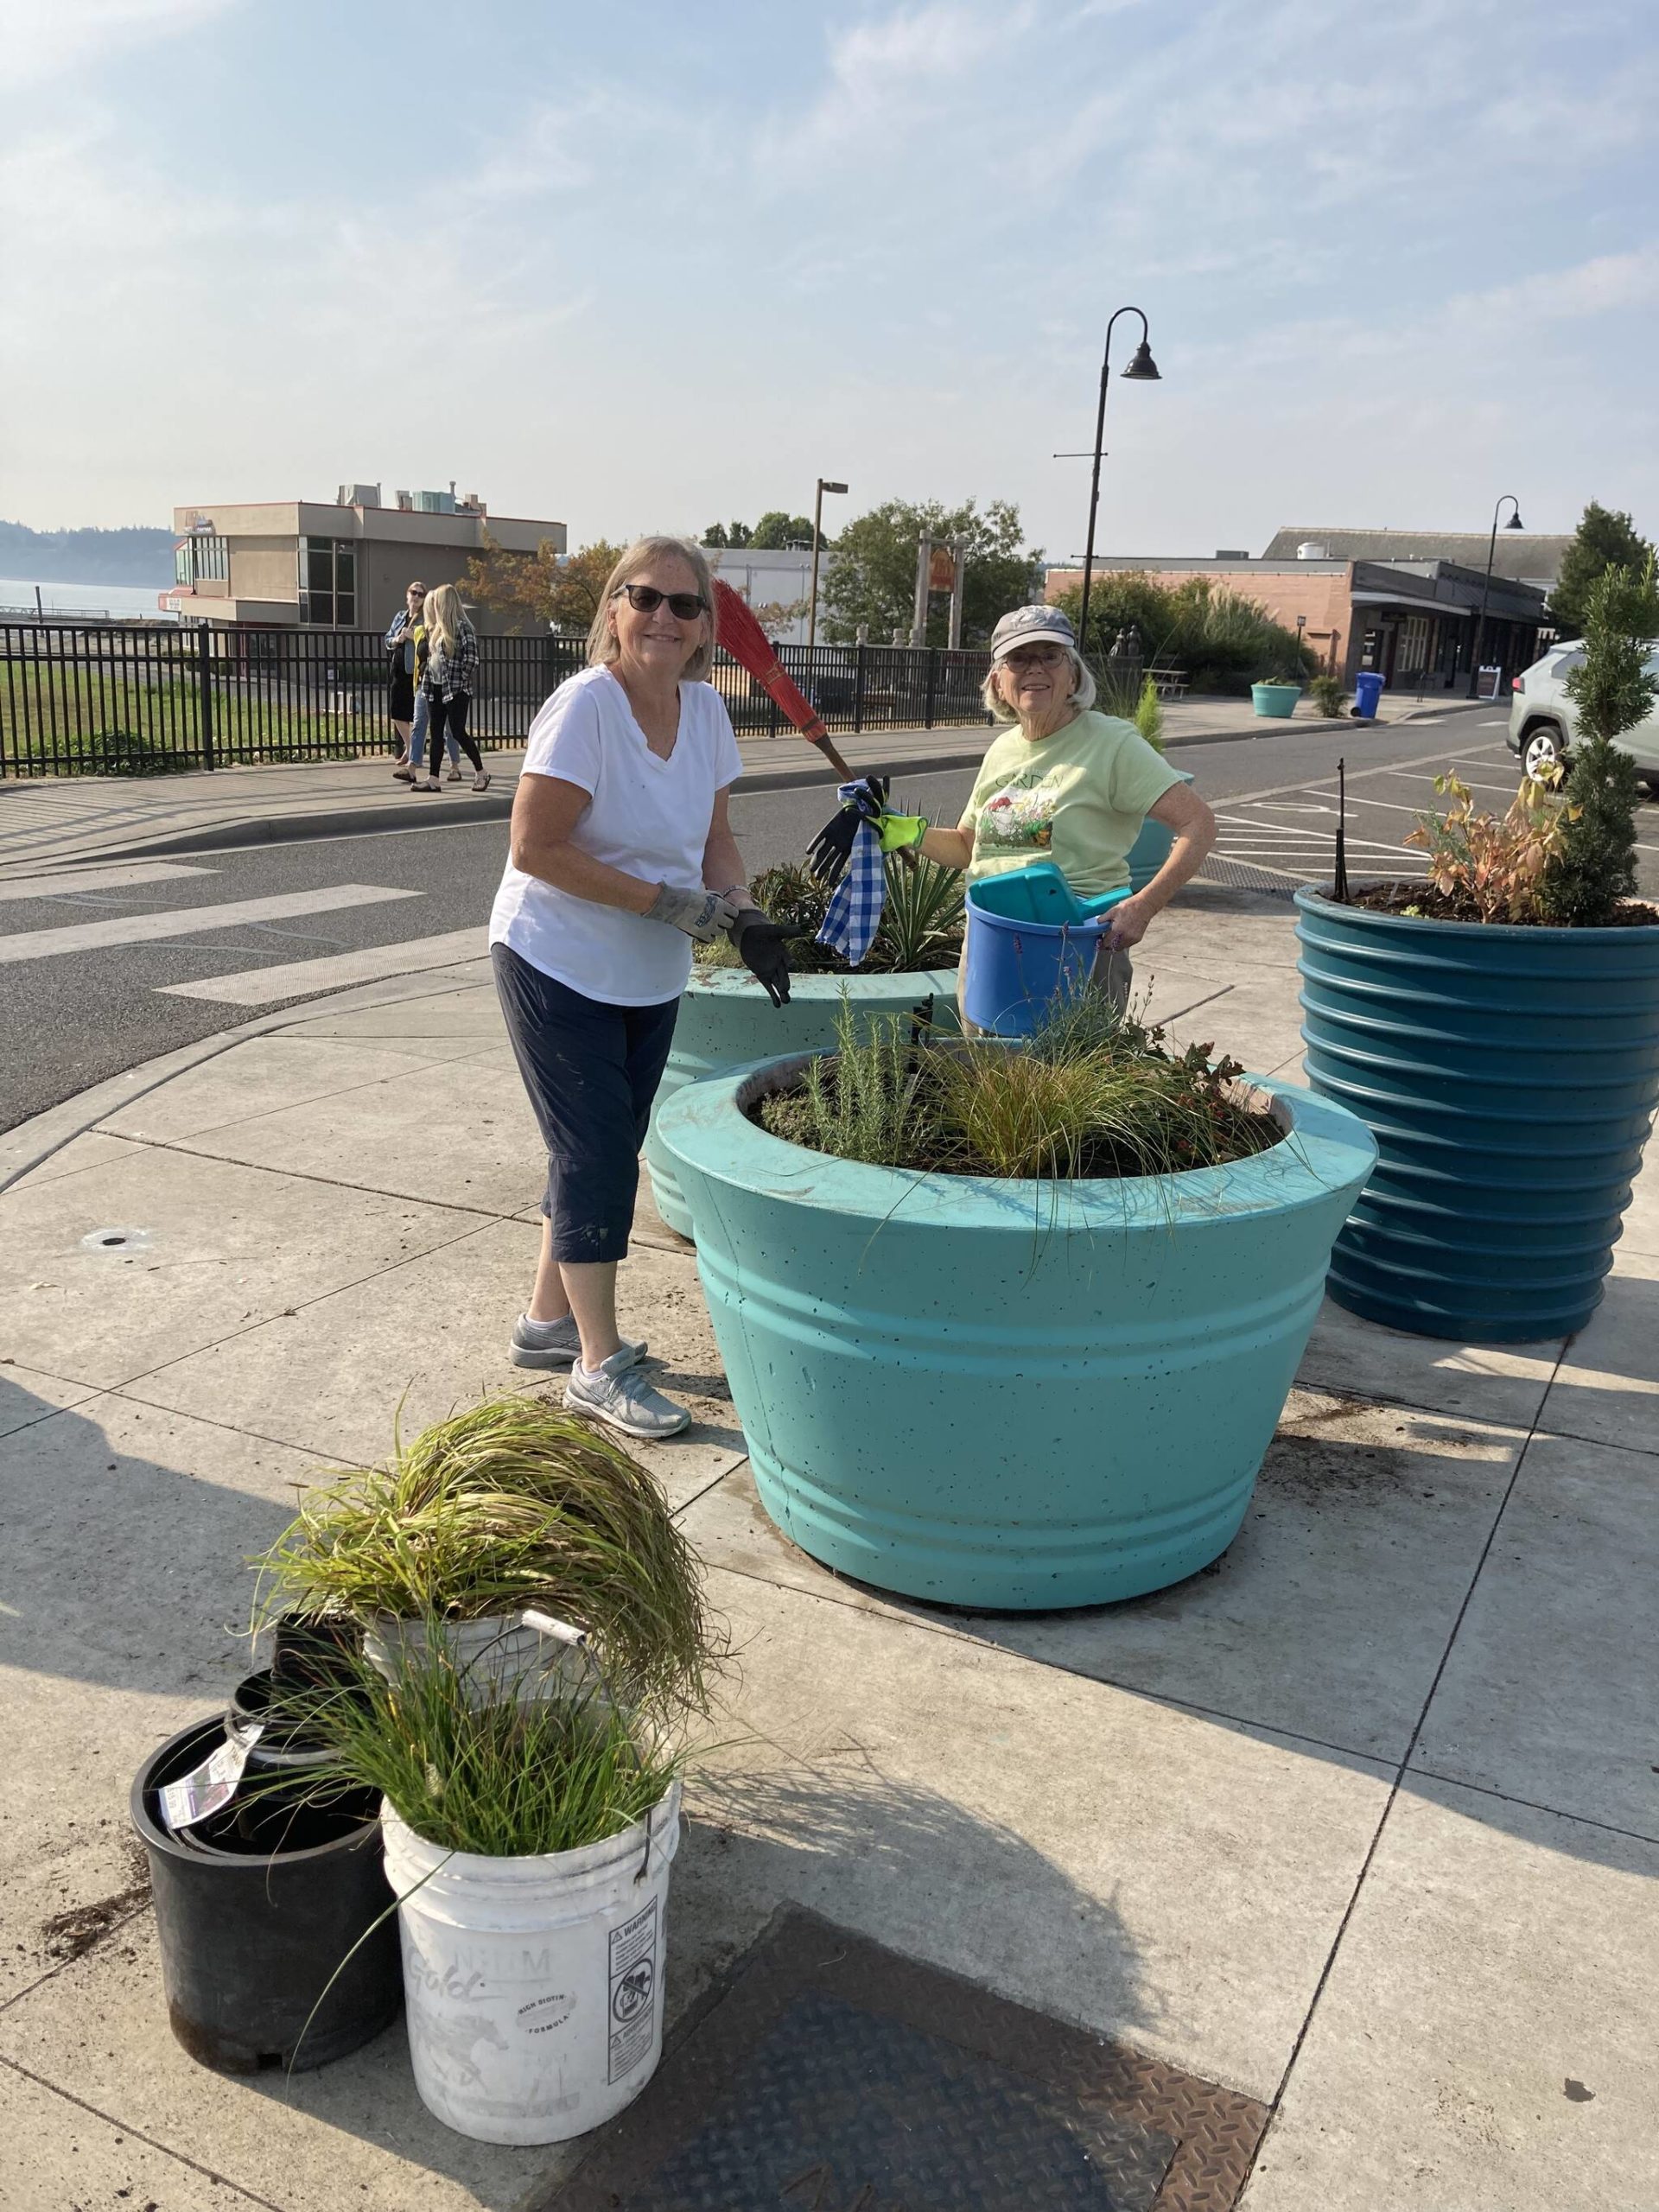 Photo provided
Oak Harbor Garden Club members Monica Cays and Kathy Harbour plant daffodil bulbs in the blue pots along Pioneer Way.